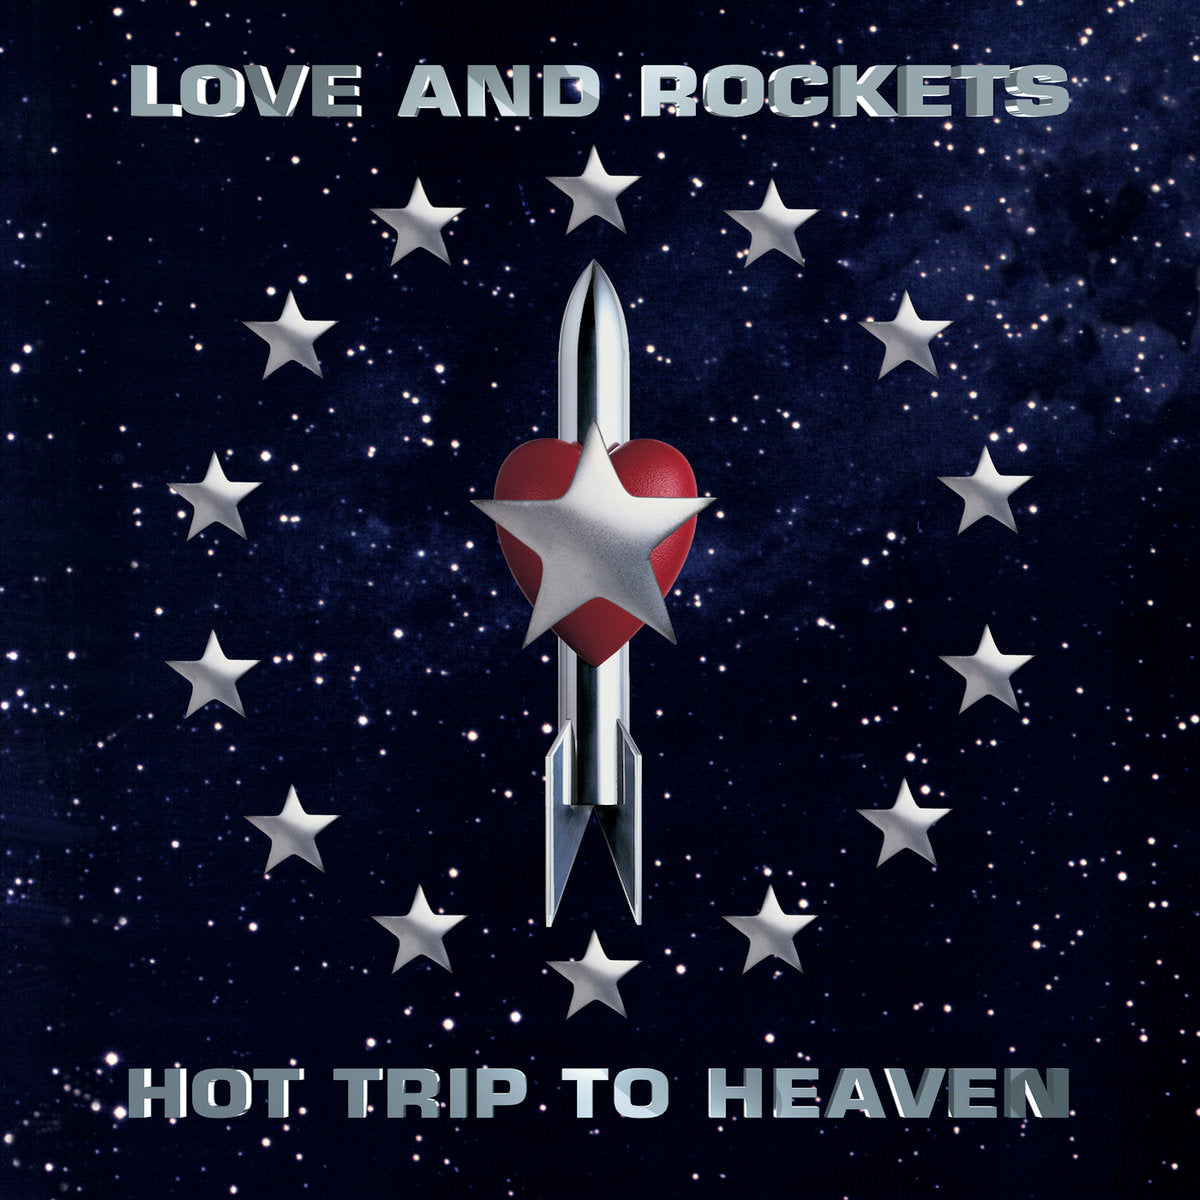 Love and Rockets "Hot Trip to Heaven" 2LP